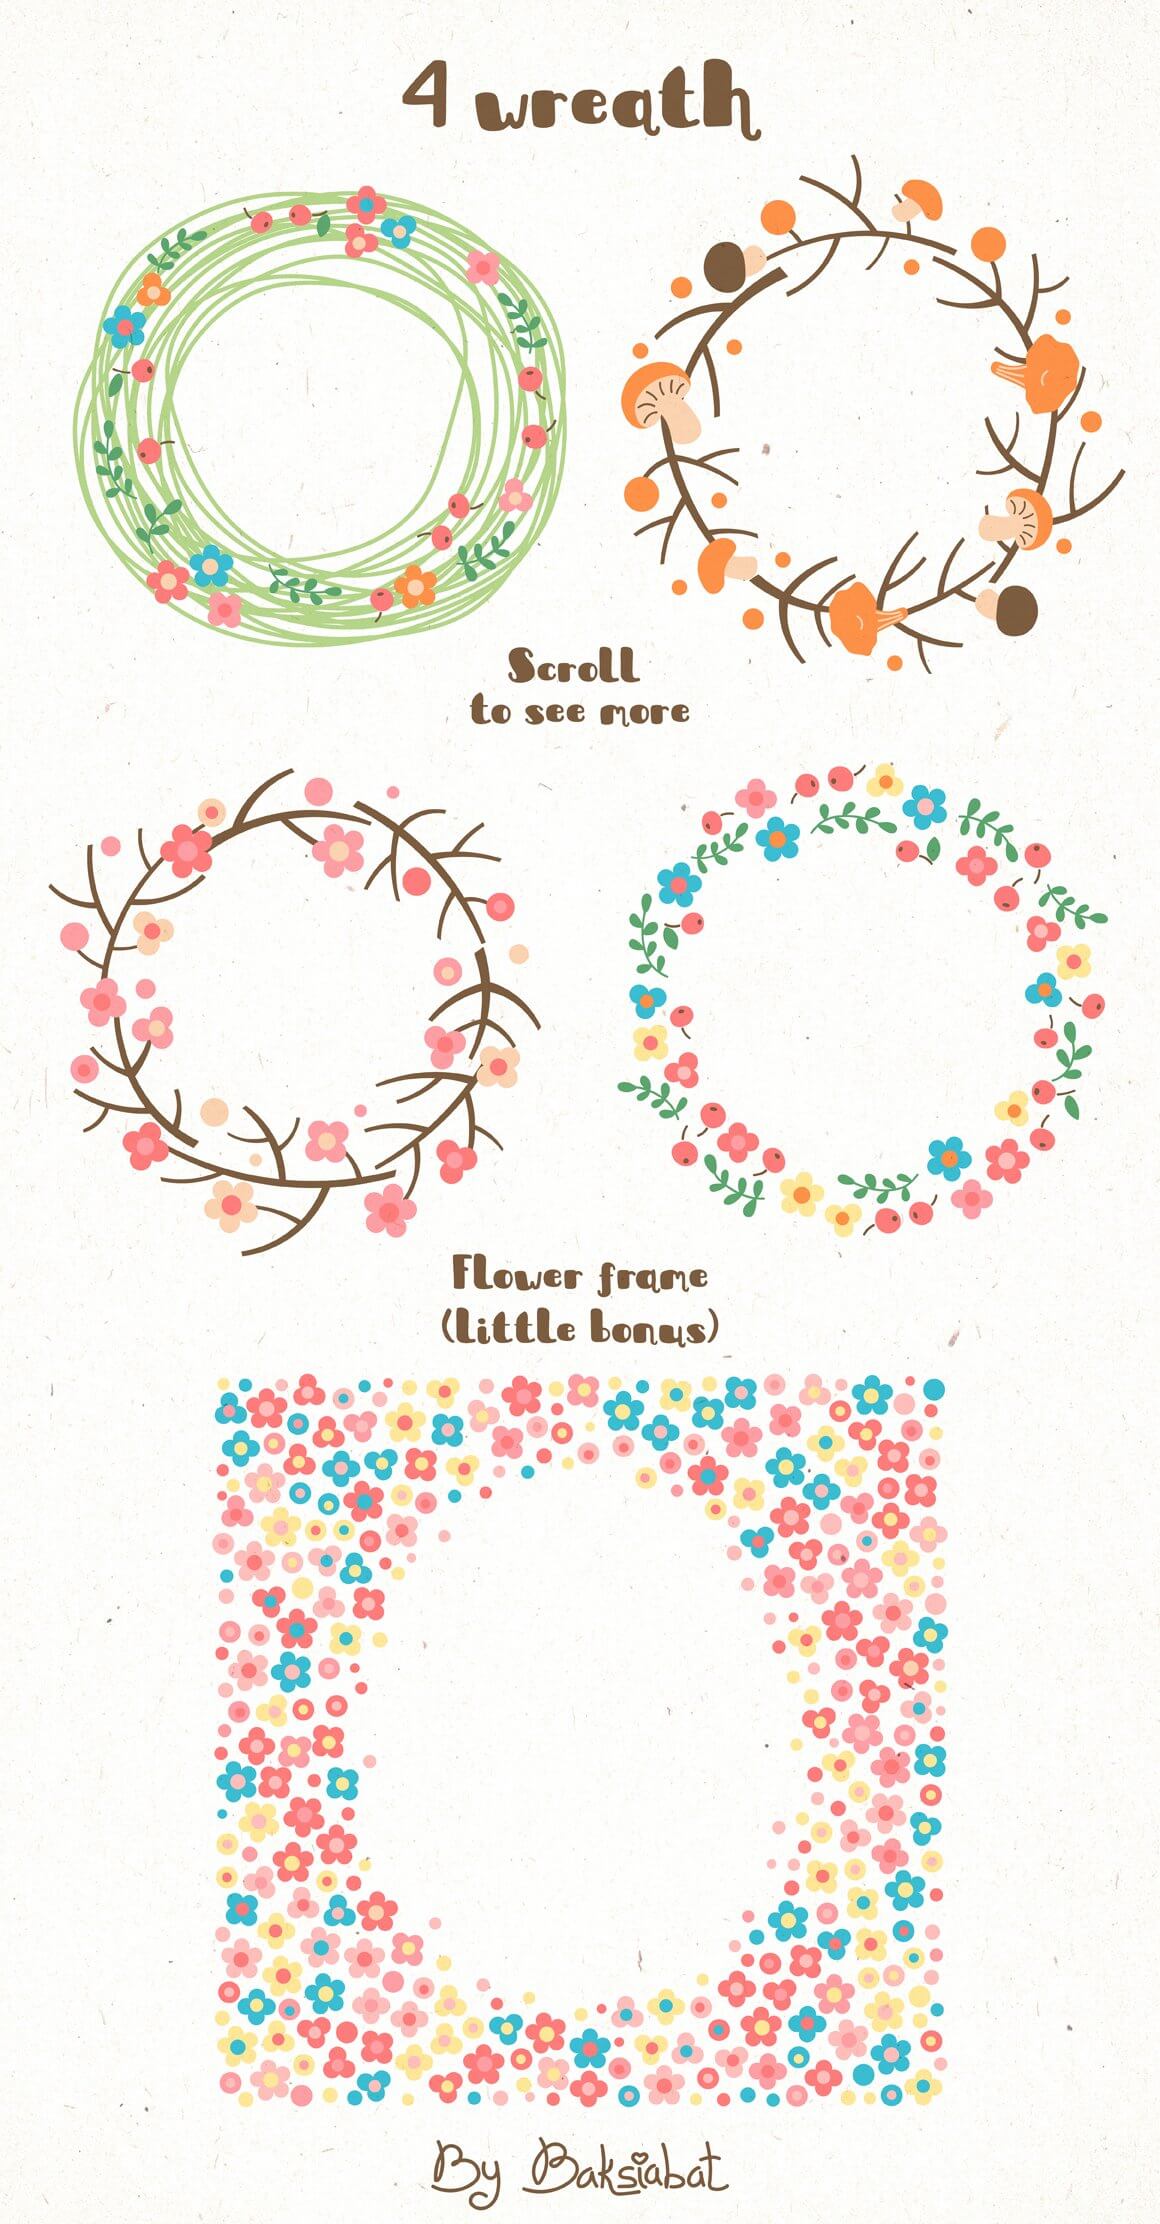 Wreaths of flowers, branches, mushrooms, leaves and a bonus flower frame.